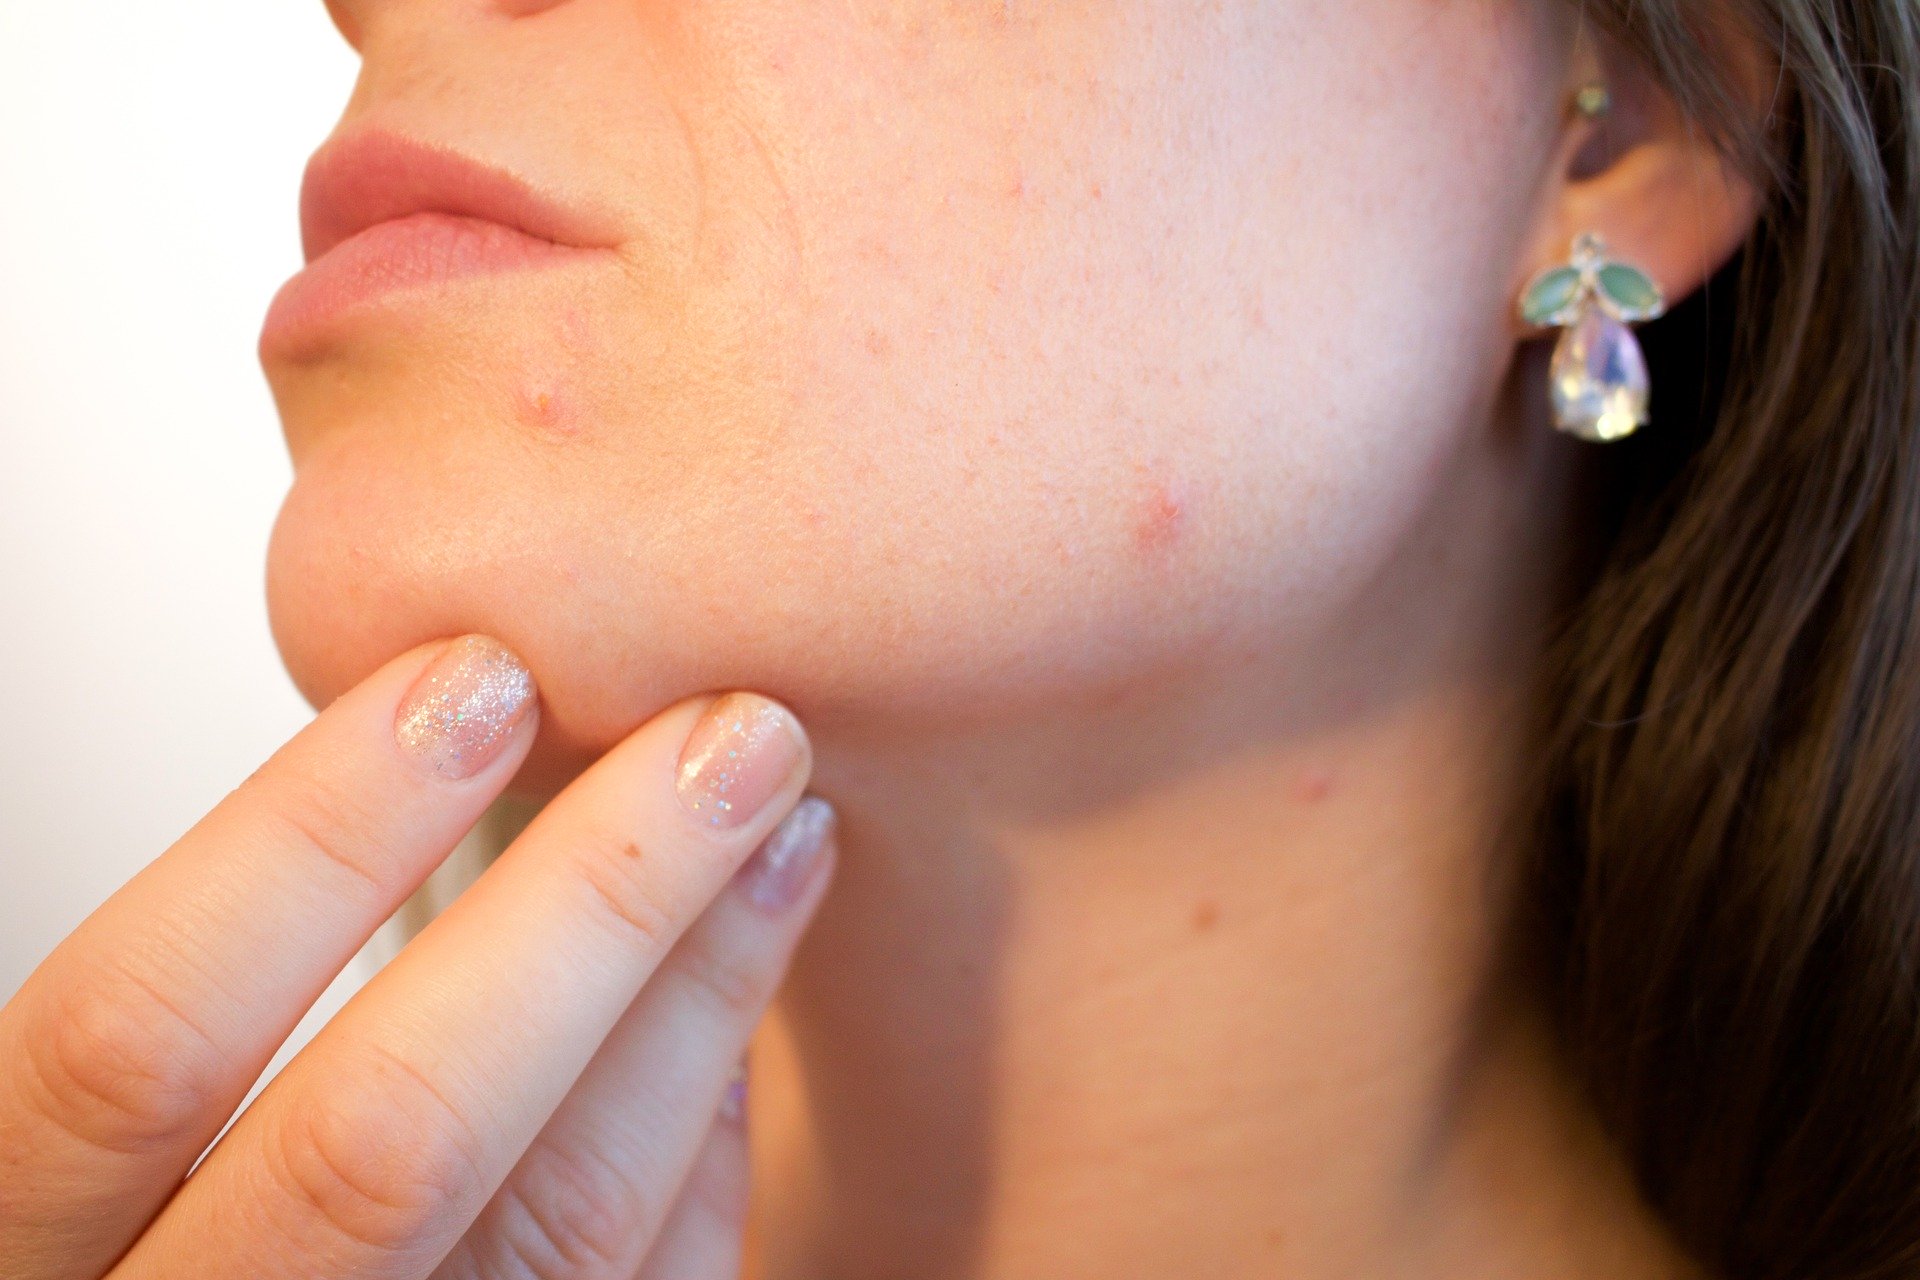 How to Get Rid of Acne Scars With Home Remedies